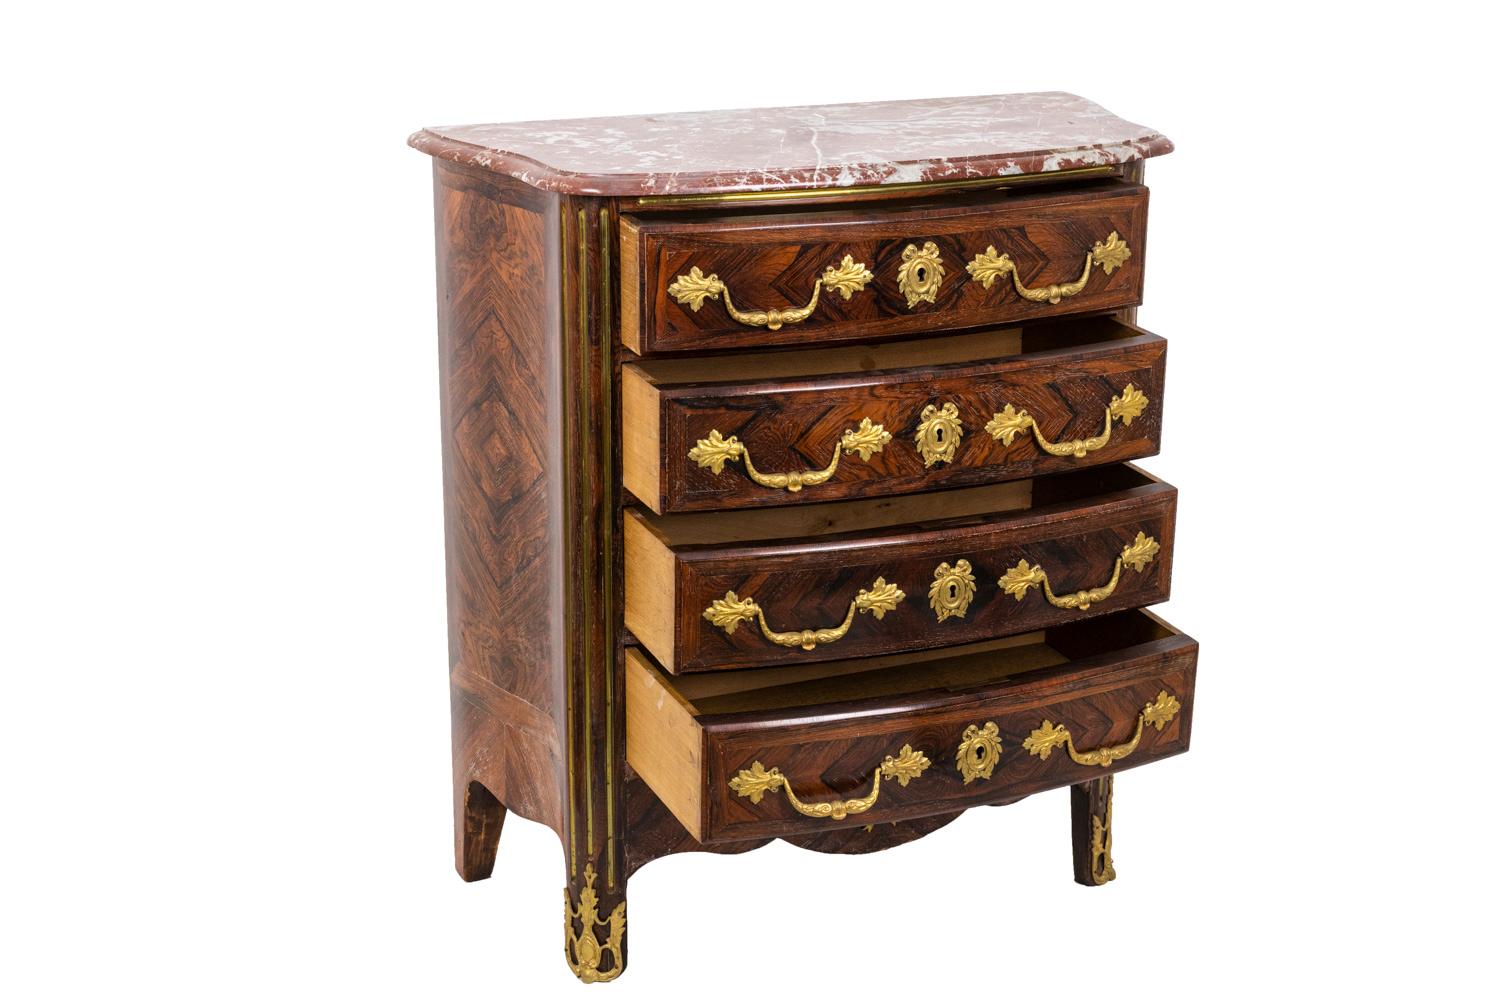 Tiny Regence style commode in kingwood marquetry opening by four drawers on four levels with a crossbar and standing on four straight legs. Bulged shape and scalopped apron. Gilt bronzes ornamentation on handles, escutcheons, inferior crossbar and